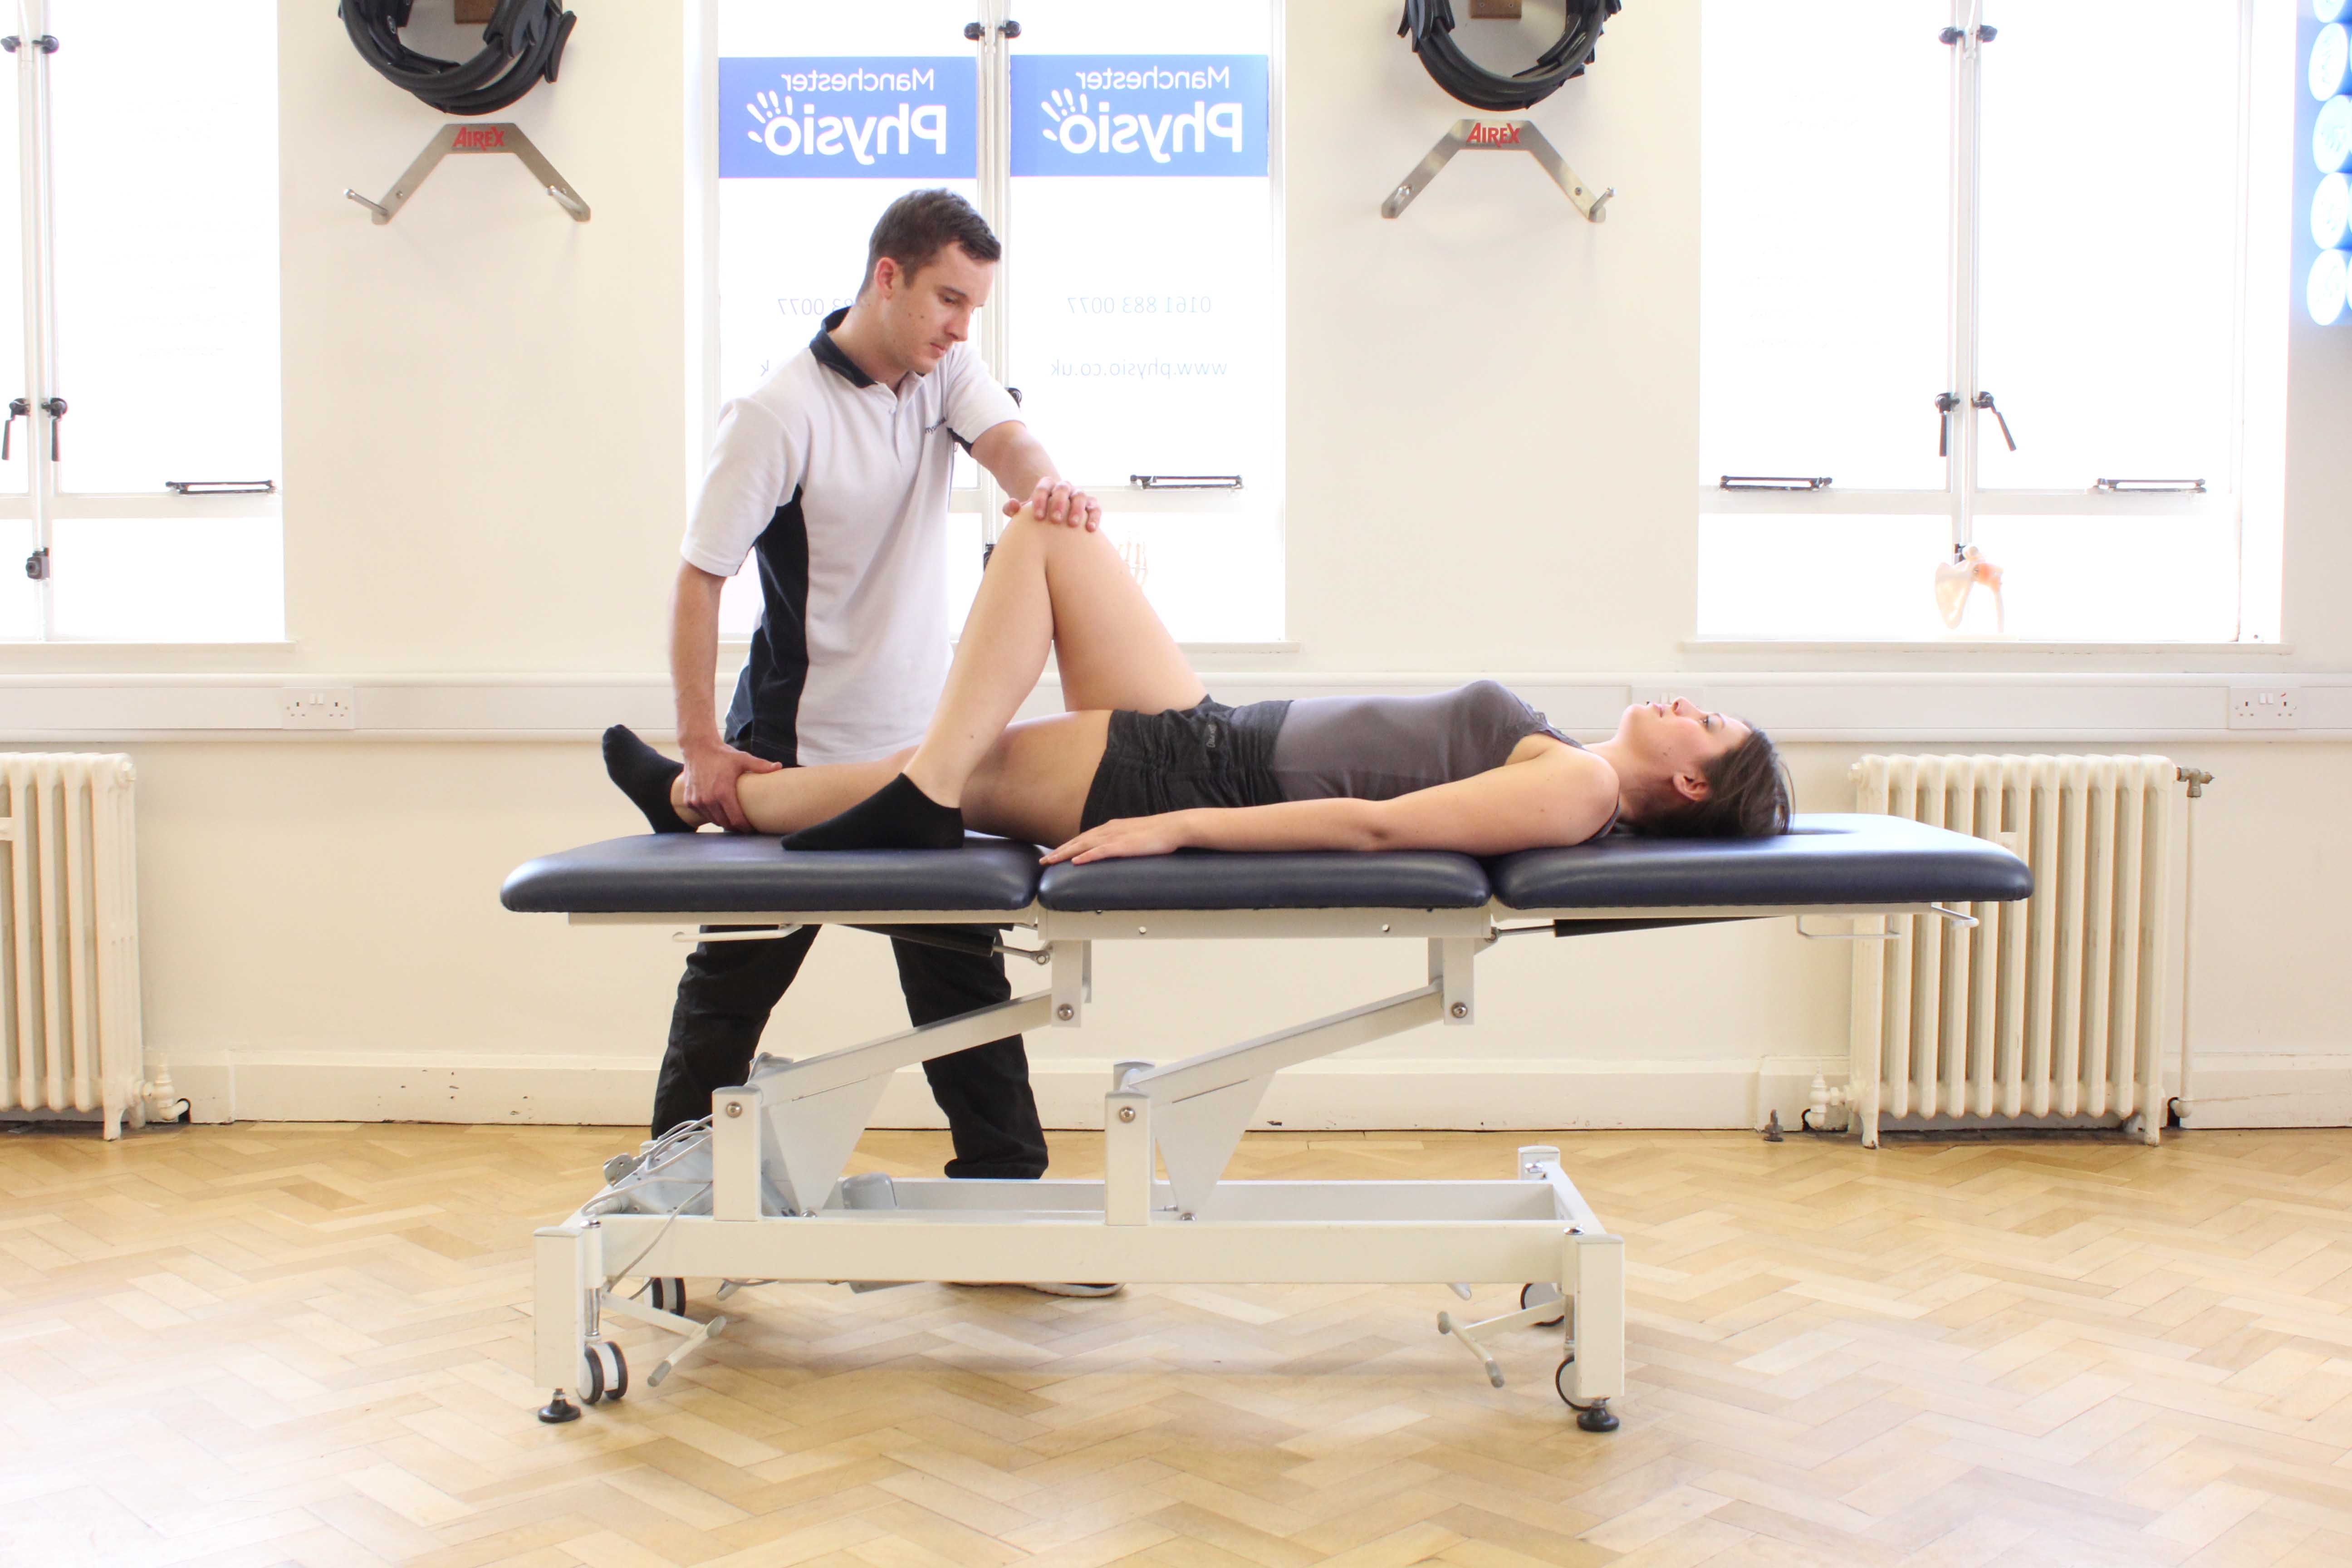 Passive stretches of the groin and pelvic muscles with supervision from a MSK therapist